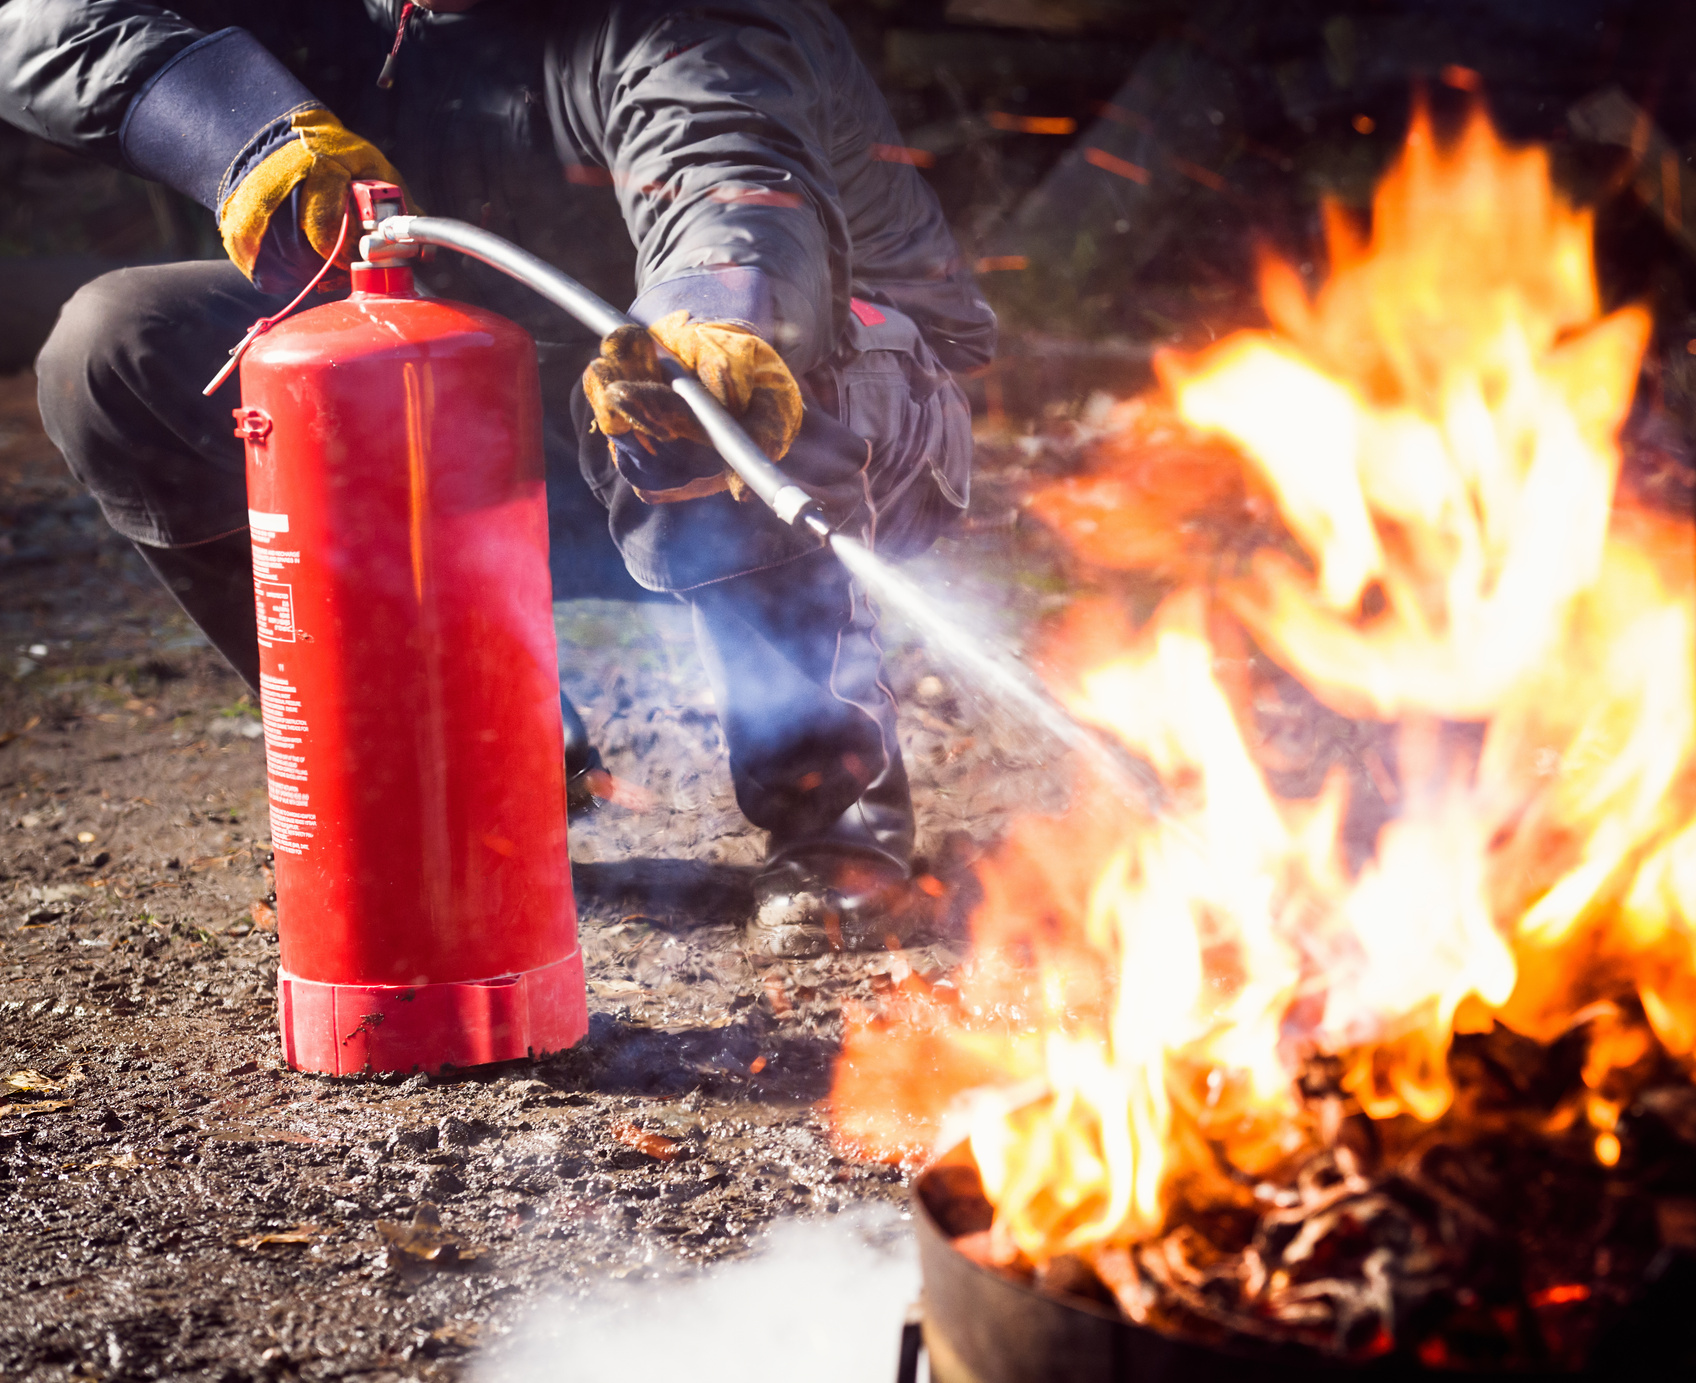 Using a fire extinguisher to fight fire